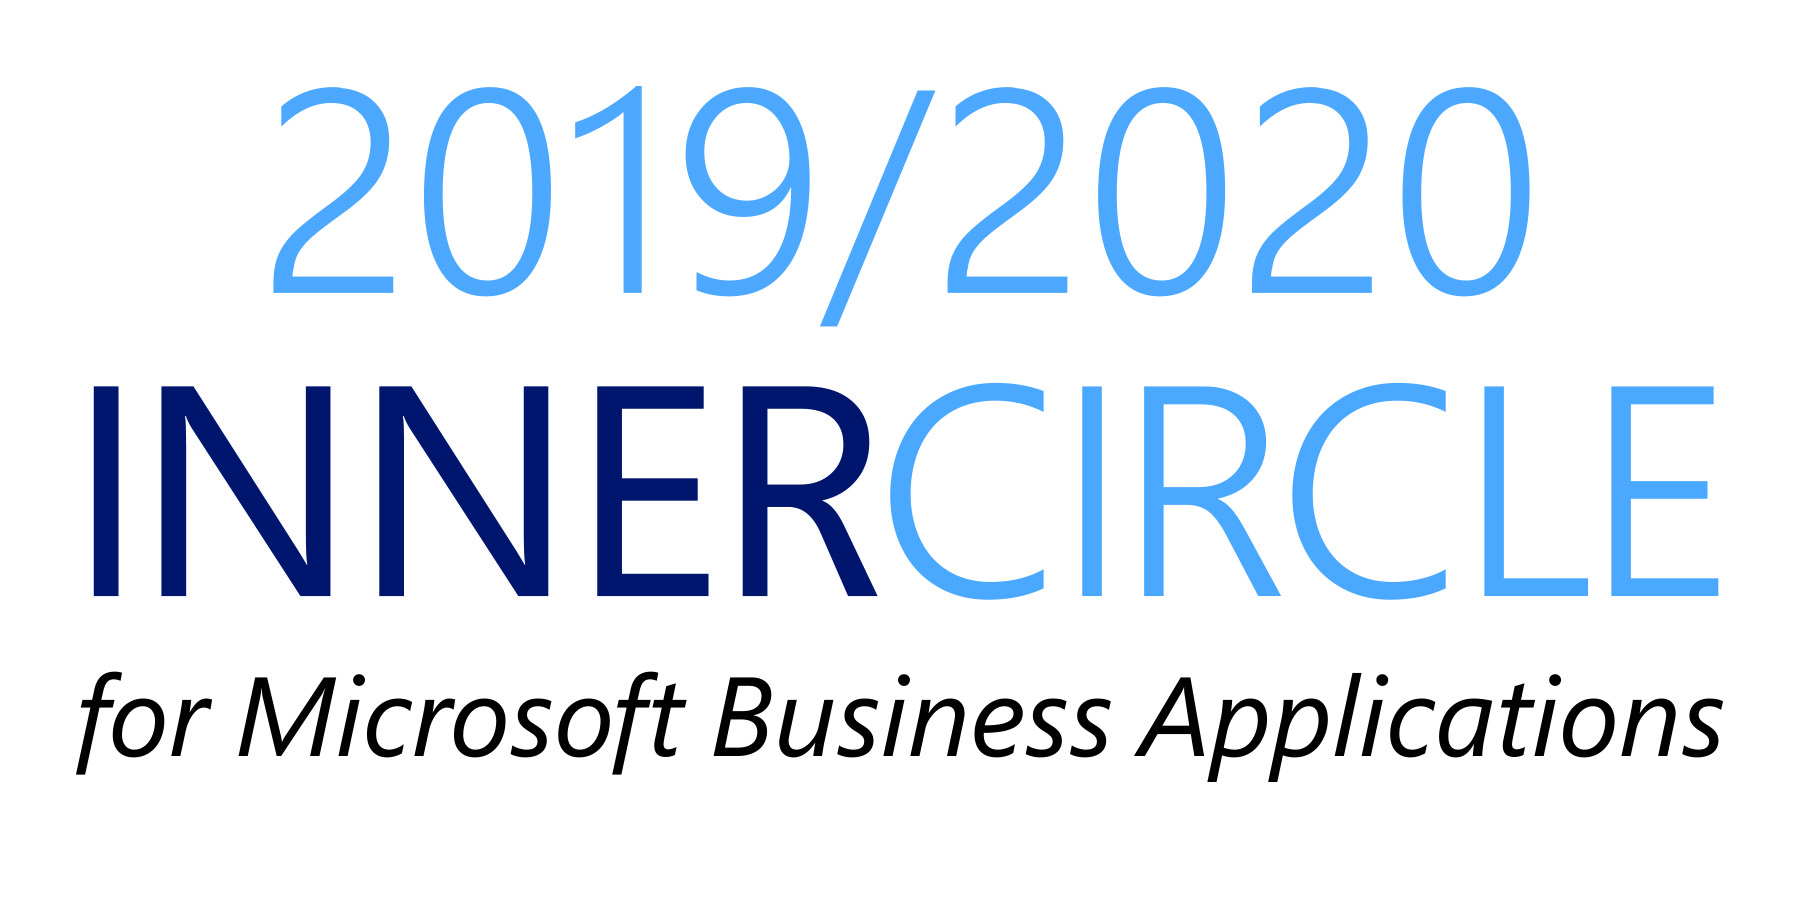 2019/2020 inner circle award for Microsoft business applications